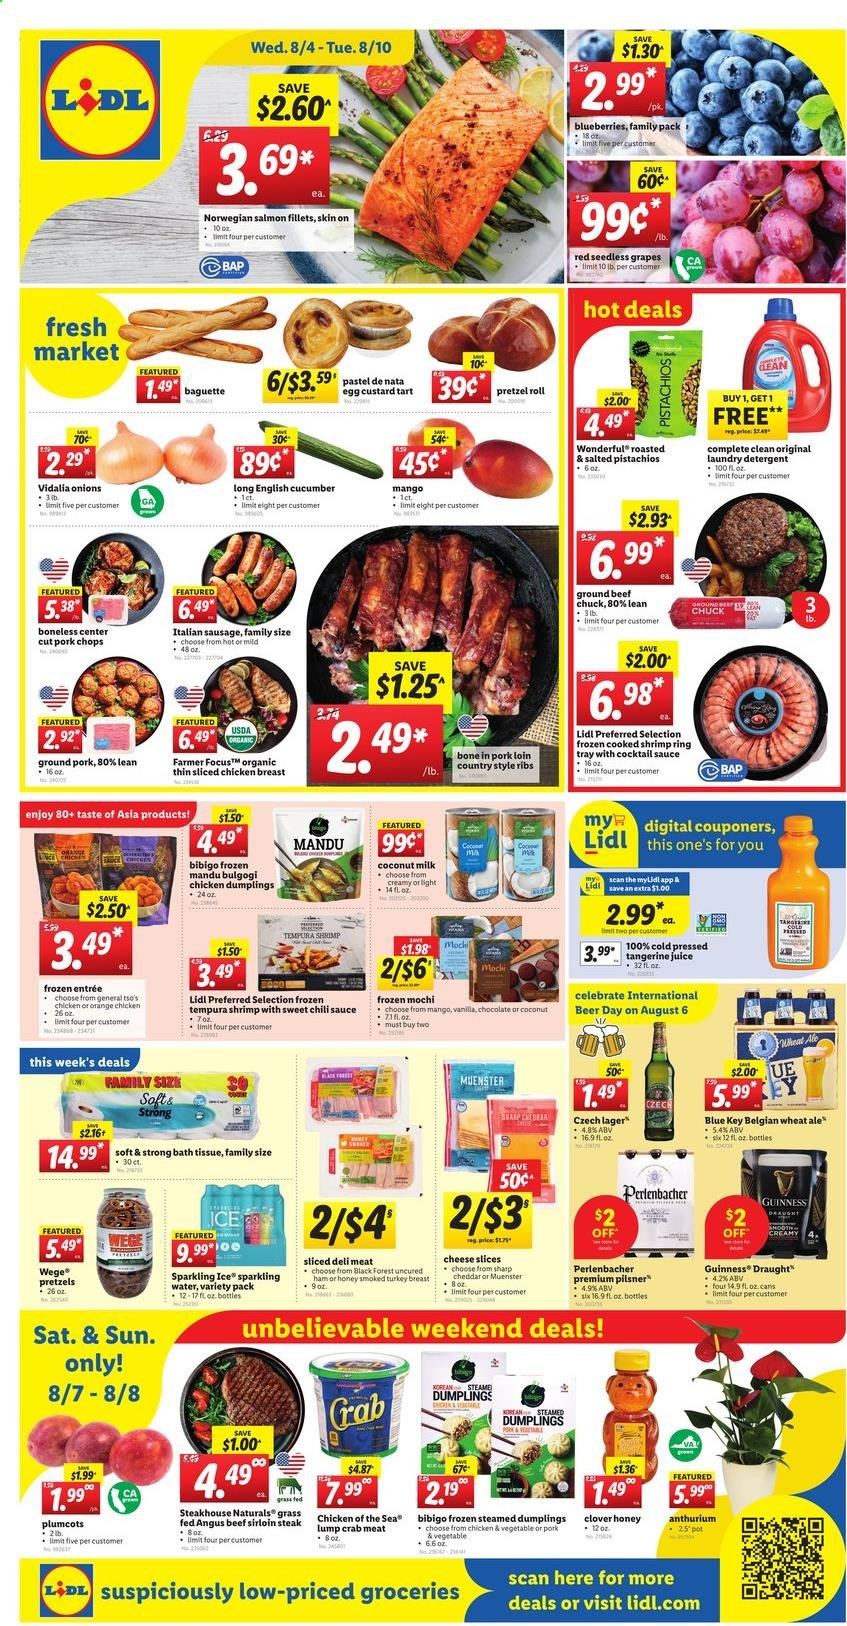 thumbnail - Lidl Flyer - 08/04/2021 - 08/10/2021 - Sales products - seedless grapes, baguette, pretzels, onion, blueberries, grapes, oranges, crab meat, salmon, salmon fillet, crab, shrimps, sauce, dumplings, uncured ham, ham, sausage, italian sausage, sliced cheese, cheddar, cheese, Münster cheese, chocolate, coconut milk, Chicken of the Sea, cocktail sauce, chilli sauce, pistachios, juice, sparkling water, beer, Perlenbacher, Guinness, Lager, chicken breasts, beef meat, beef sirloin, ground beef, steak, sirloin steak, ground pork, pork chops, pork loin, pork meat, pork ribs, country style ribs, bath tissue, detergent, laundry detergent, lid, pot. Page 1.